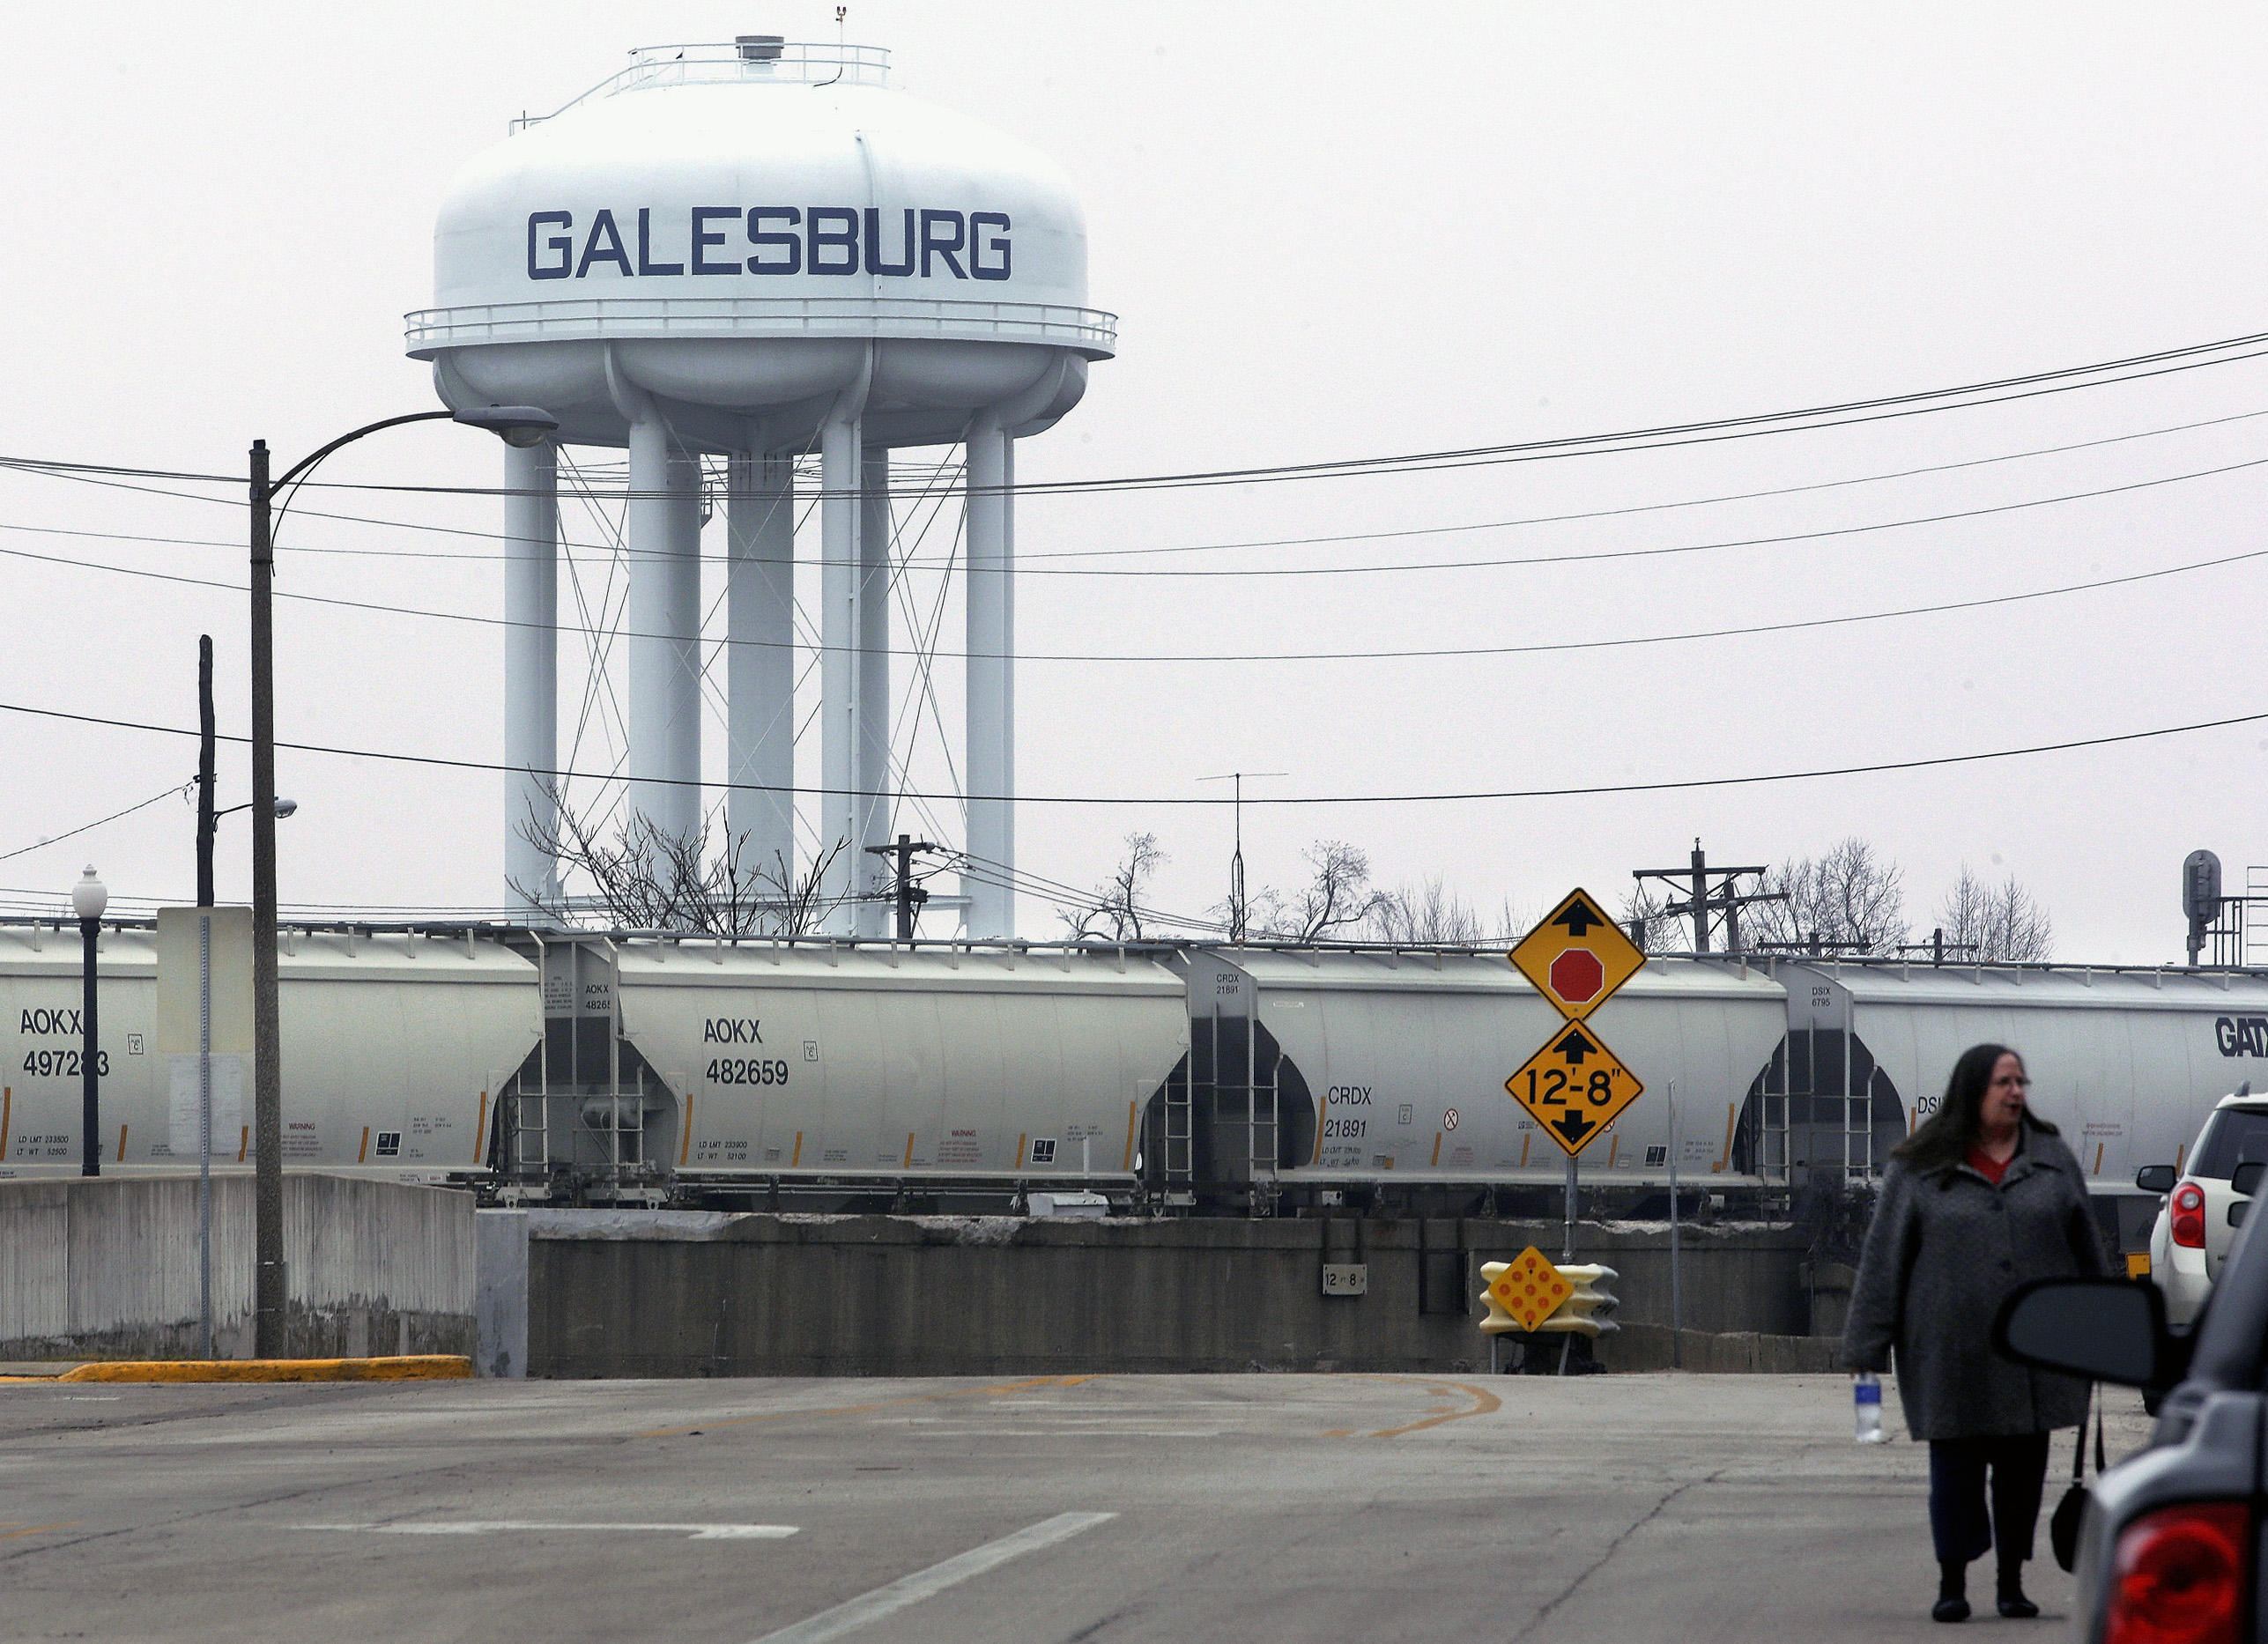 ADVANCE FOR RELEASE SATURDAY, APRIL 9, 2016, AT 10:00 A.M. EDT - In this Wednesday, March 9, 2016 photo, a train passes the water tower in downtown Galesburg, Ill. Galesburg offers just one example of how the problem of lead-tainted drinking water goes far beyond Flint, Mich., the former auto manufacturing center where the issue exploded into a public health emergency when the city’s entire water system was declared unsafe. (AP Photo/Seth Perlman)